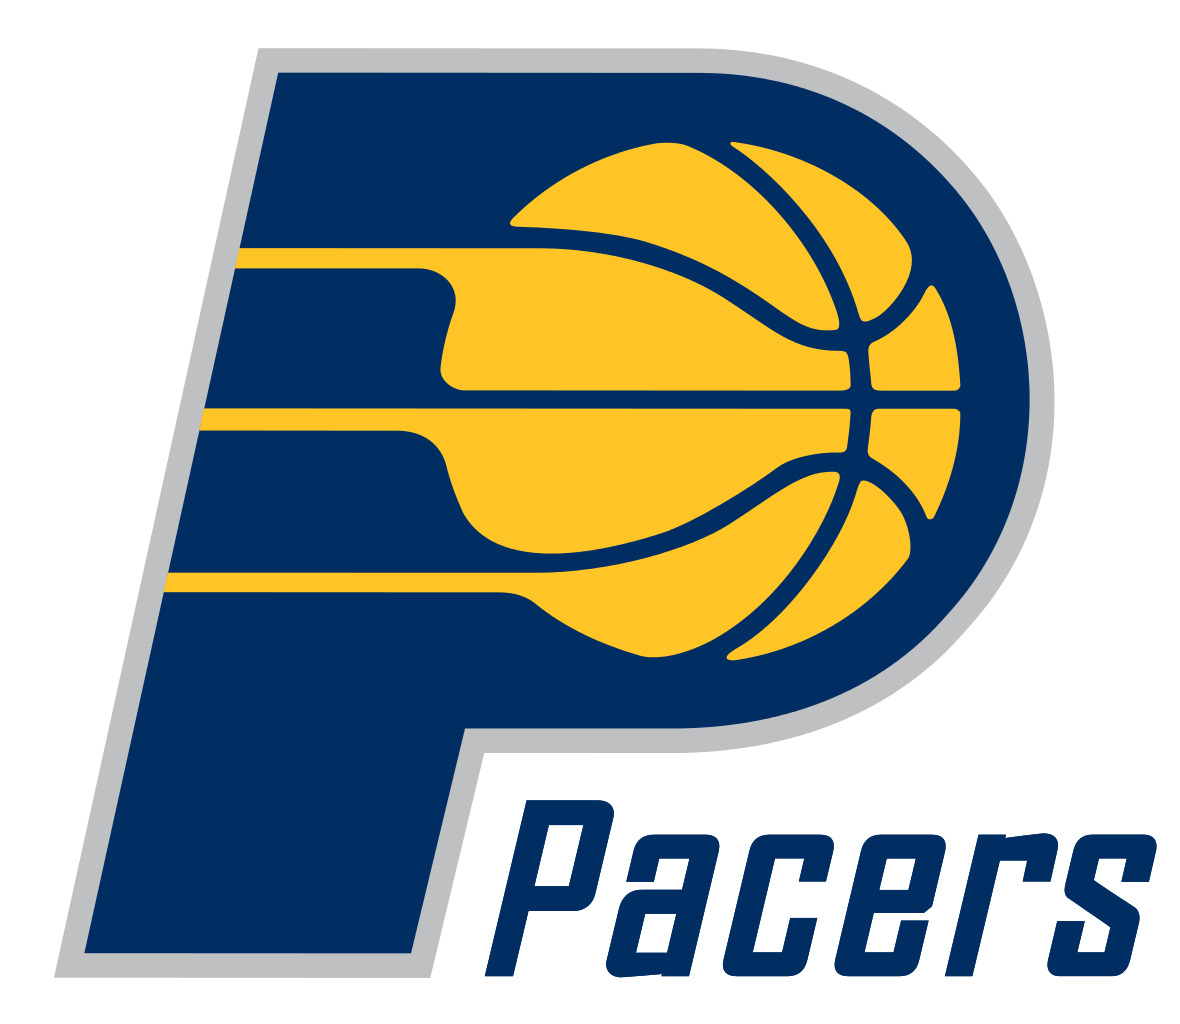 Indiana Pacers Logo icons